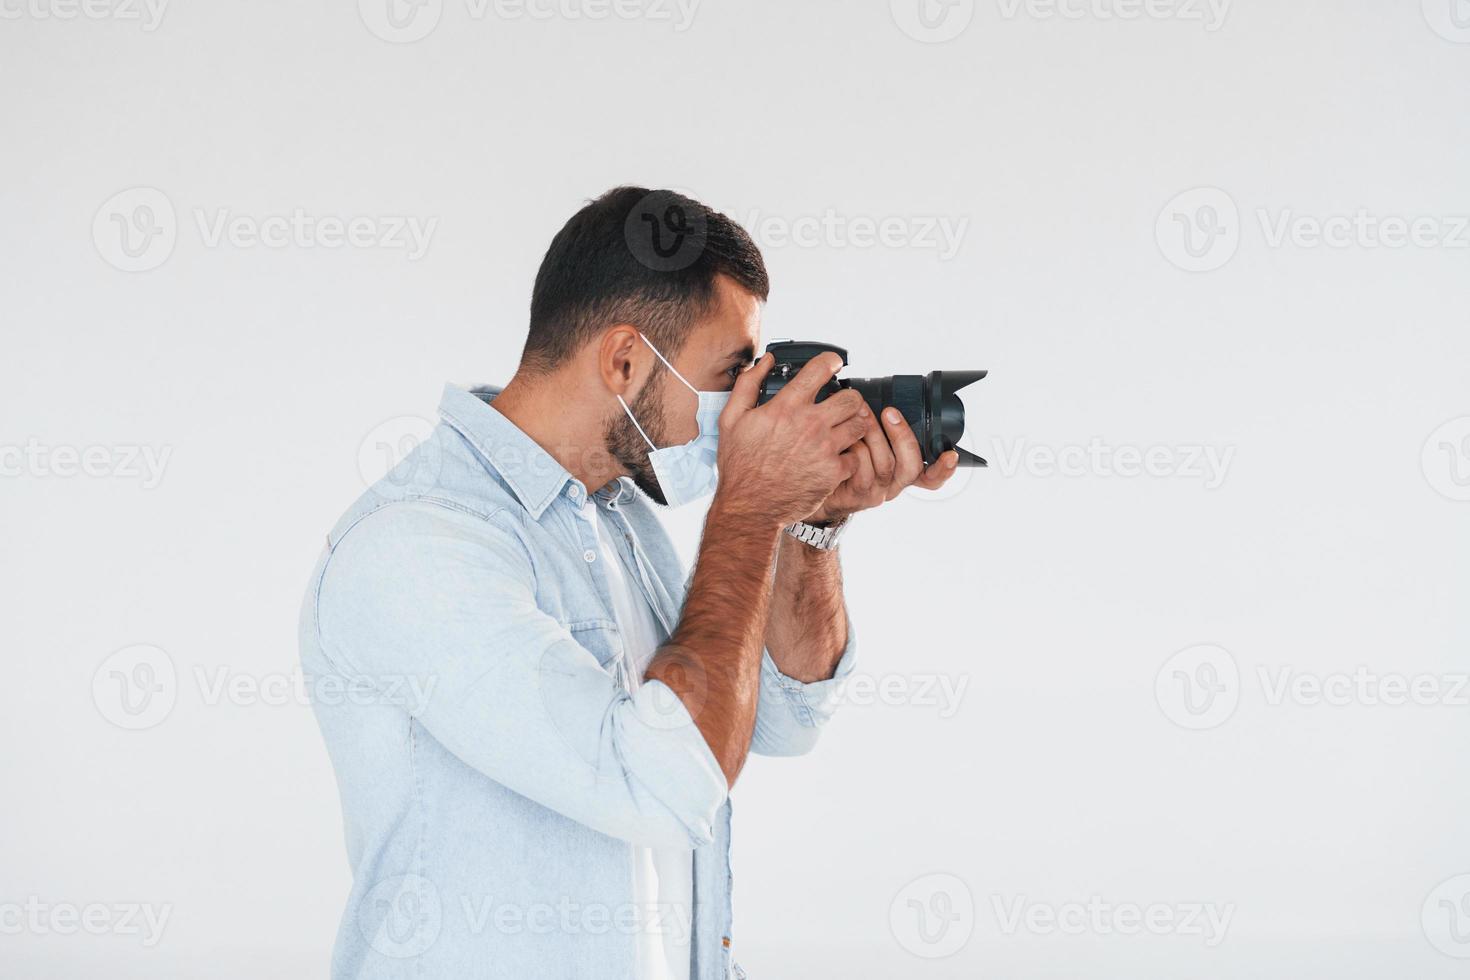 With professional camera. Young handsome man standing indoors against white background photo